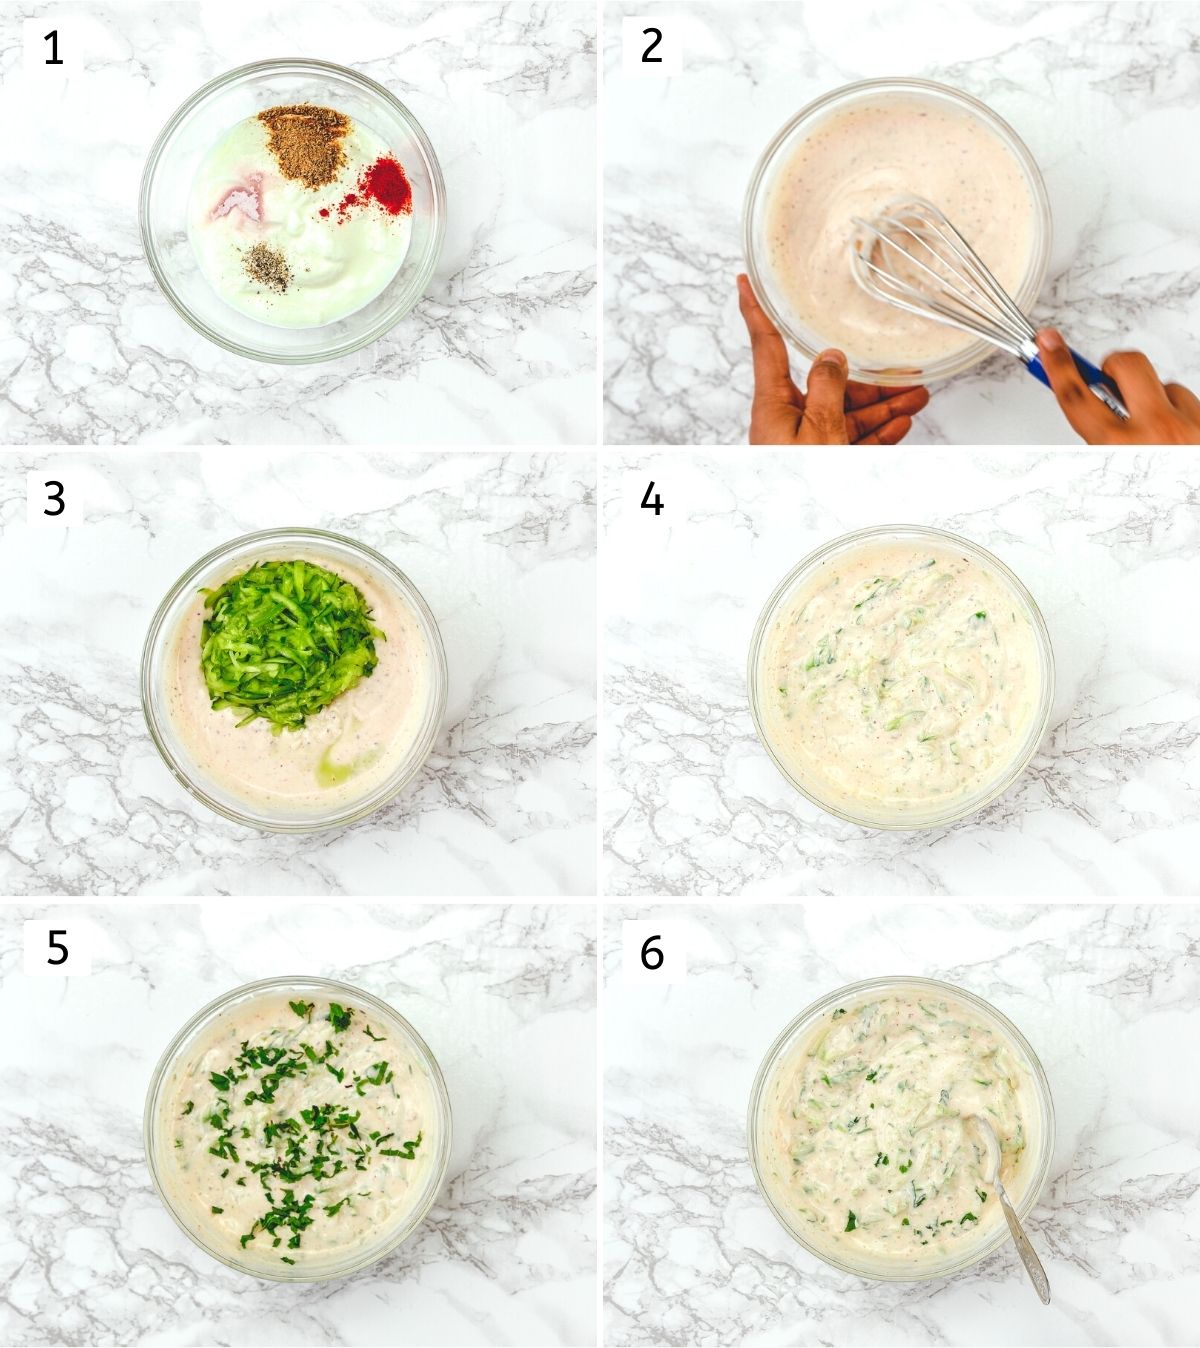 Collage of 6 images showing yogurt, spices in a bowl, mixed, adding cucumber and mint, mixing together.